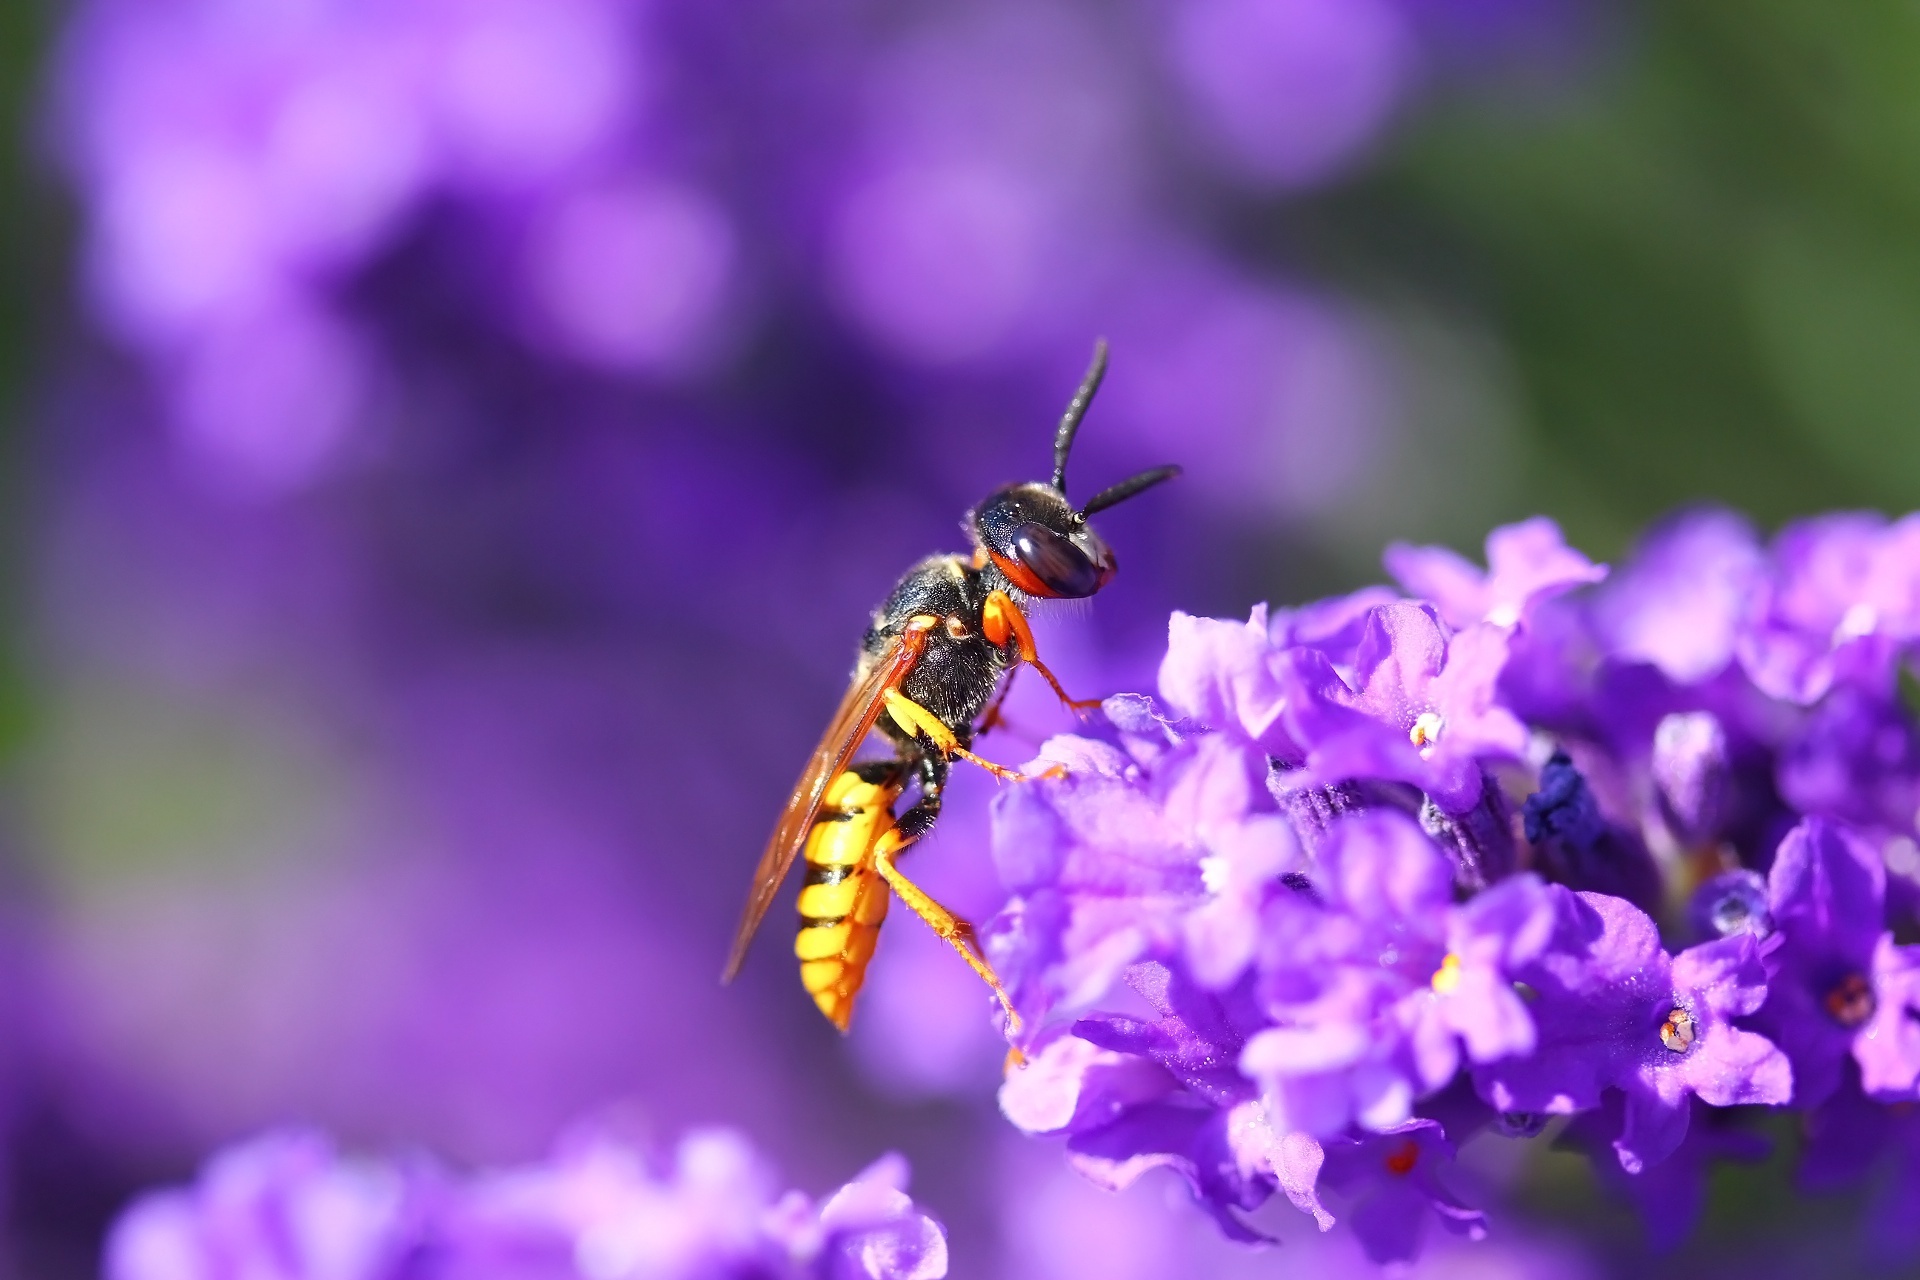 Wasp wallpapers, Insect beauty, Nature's tiny warriors, 4K resolution, 1920x1280 HD Desktop